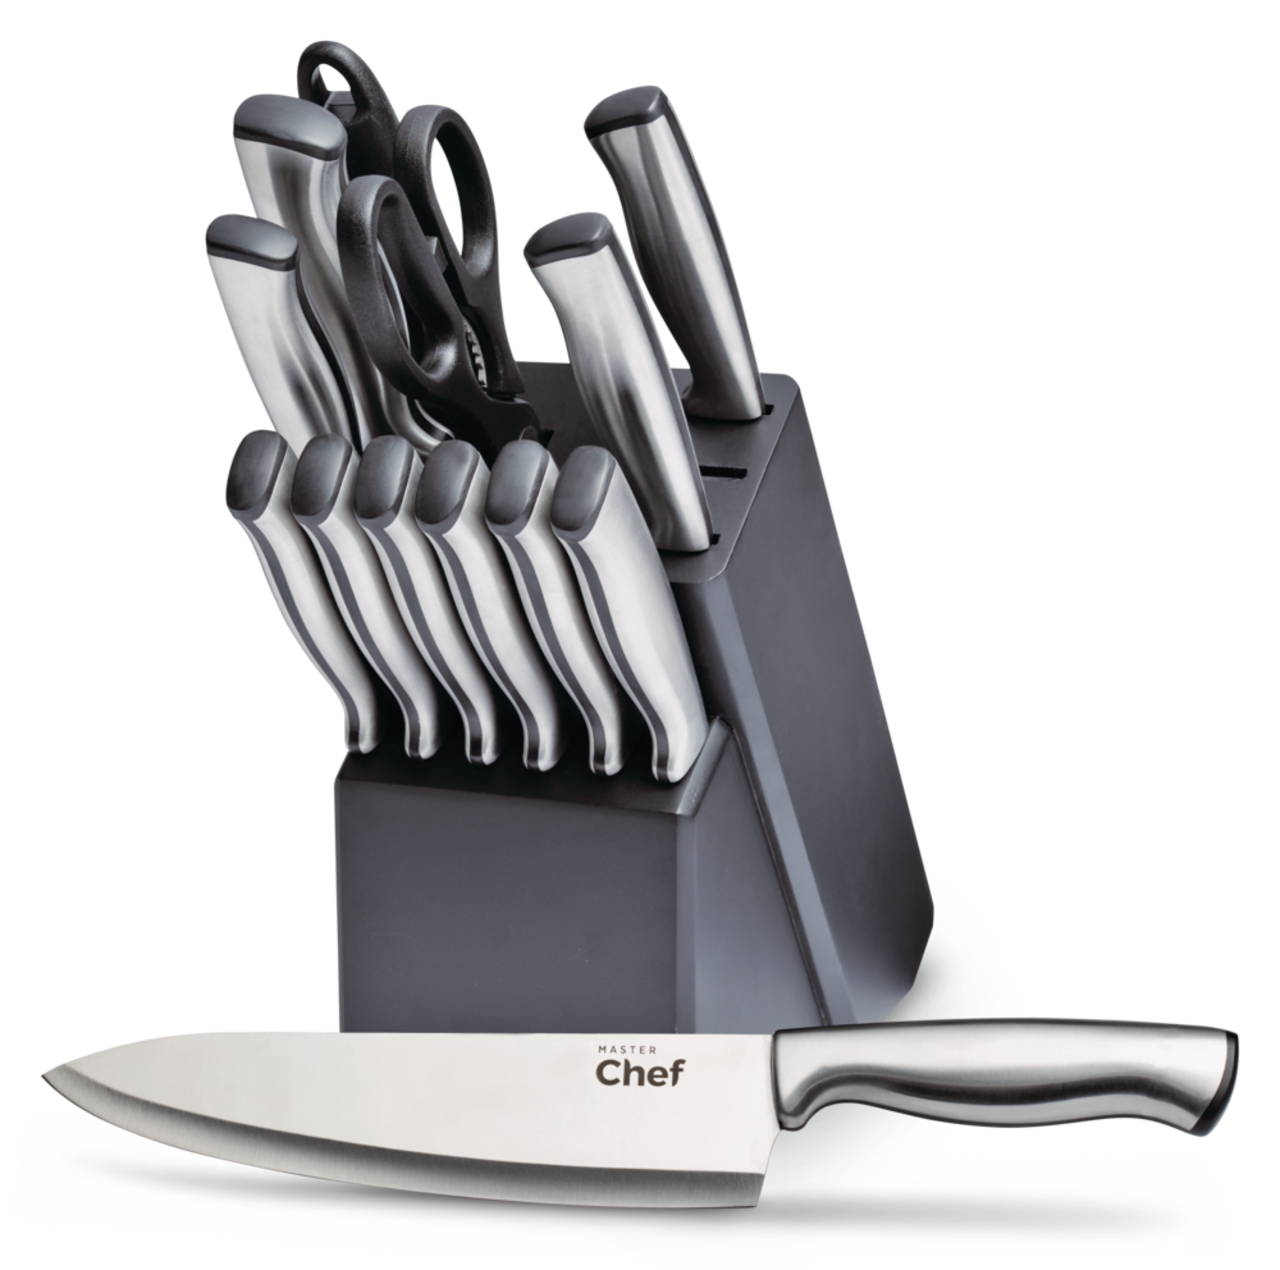 https://media-www.canadiantire.ca/product/living/kitchen/cutlery/1423454/masterchef-stamp-cutlery-set-14-piece-5c8d9703-5e8a-407d-a4bd-d0192d548d26.png?imdensity=1&imwidth=640&impolicy=mZoom